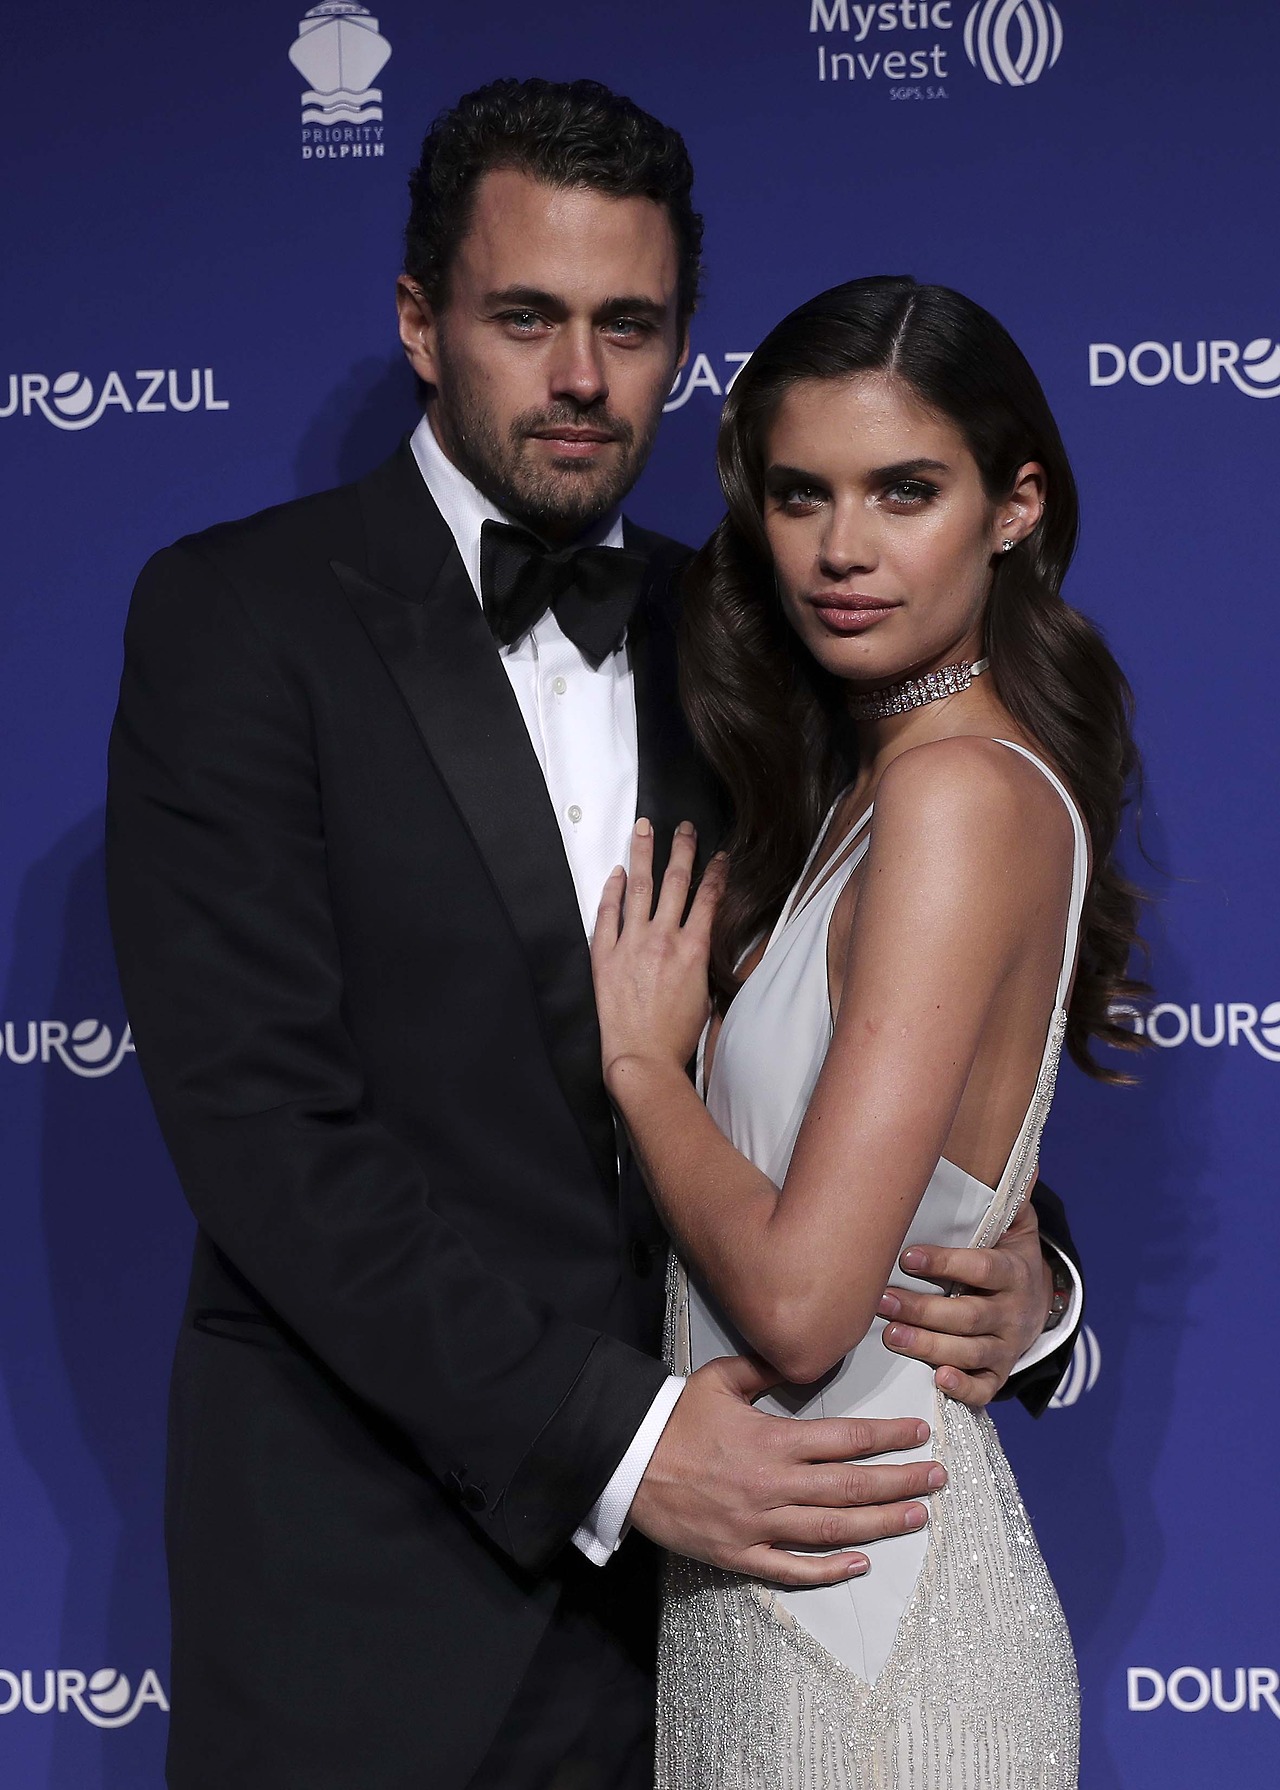 Backless Dress is The Best Fit For Sara Sampaio